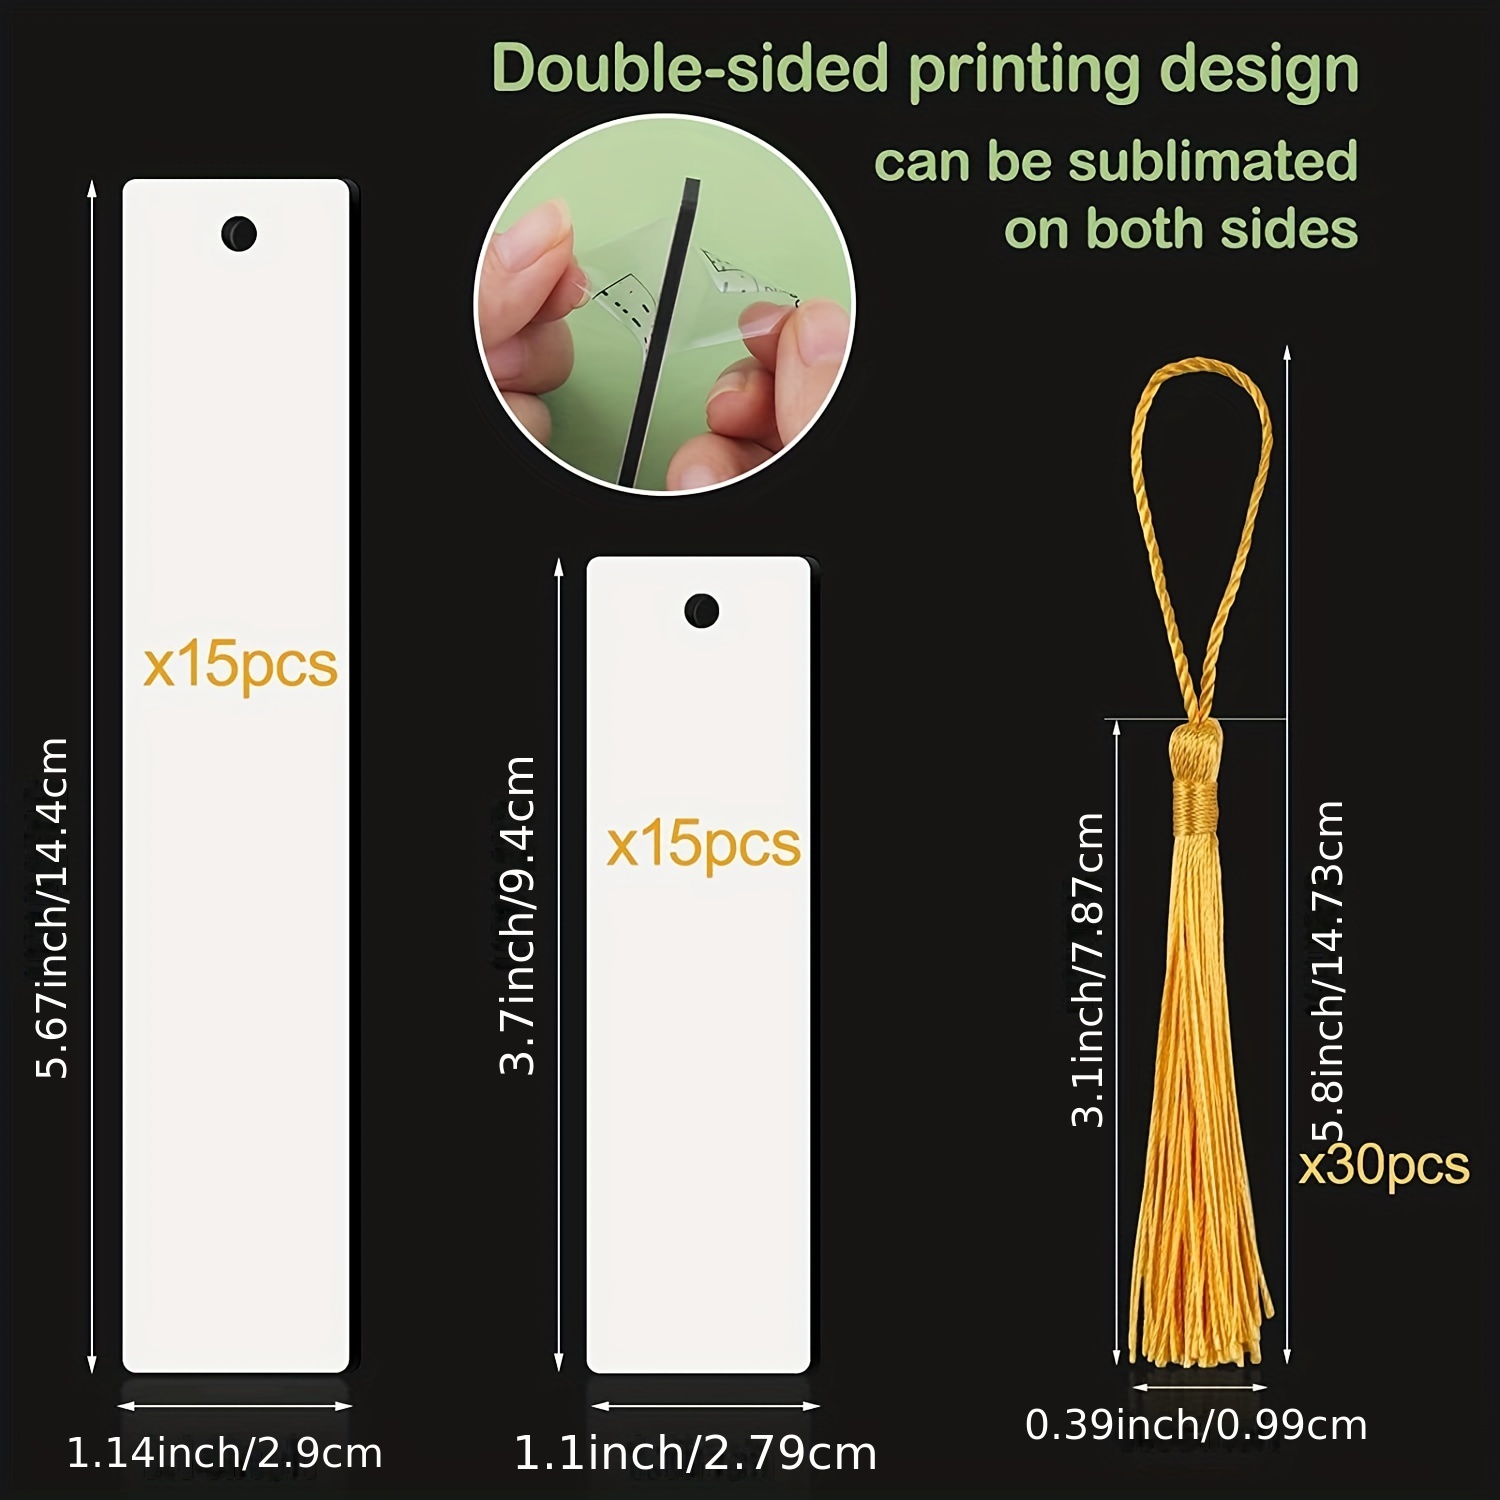 Blank Metal Bookmarks with Hole and Tassels, Sublimation Blank Bookmarks,  20 Pcs